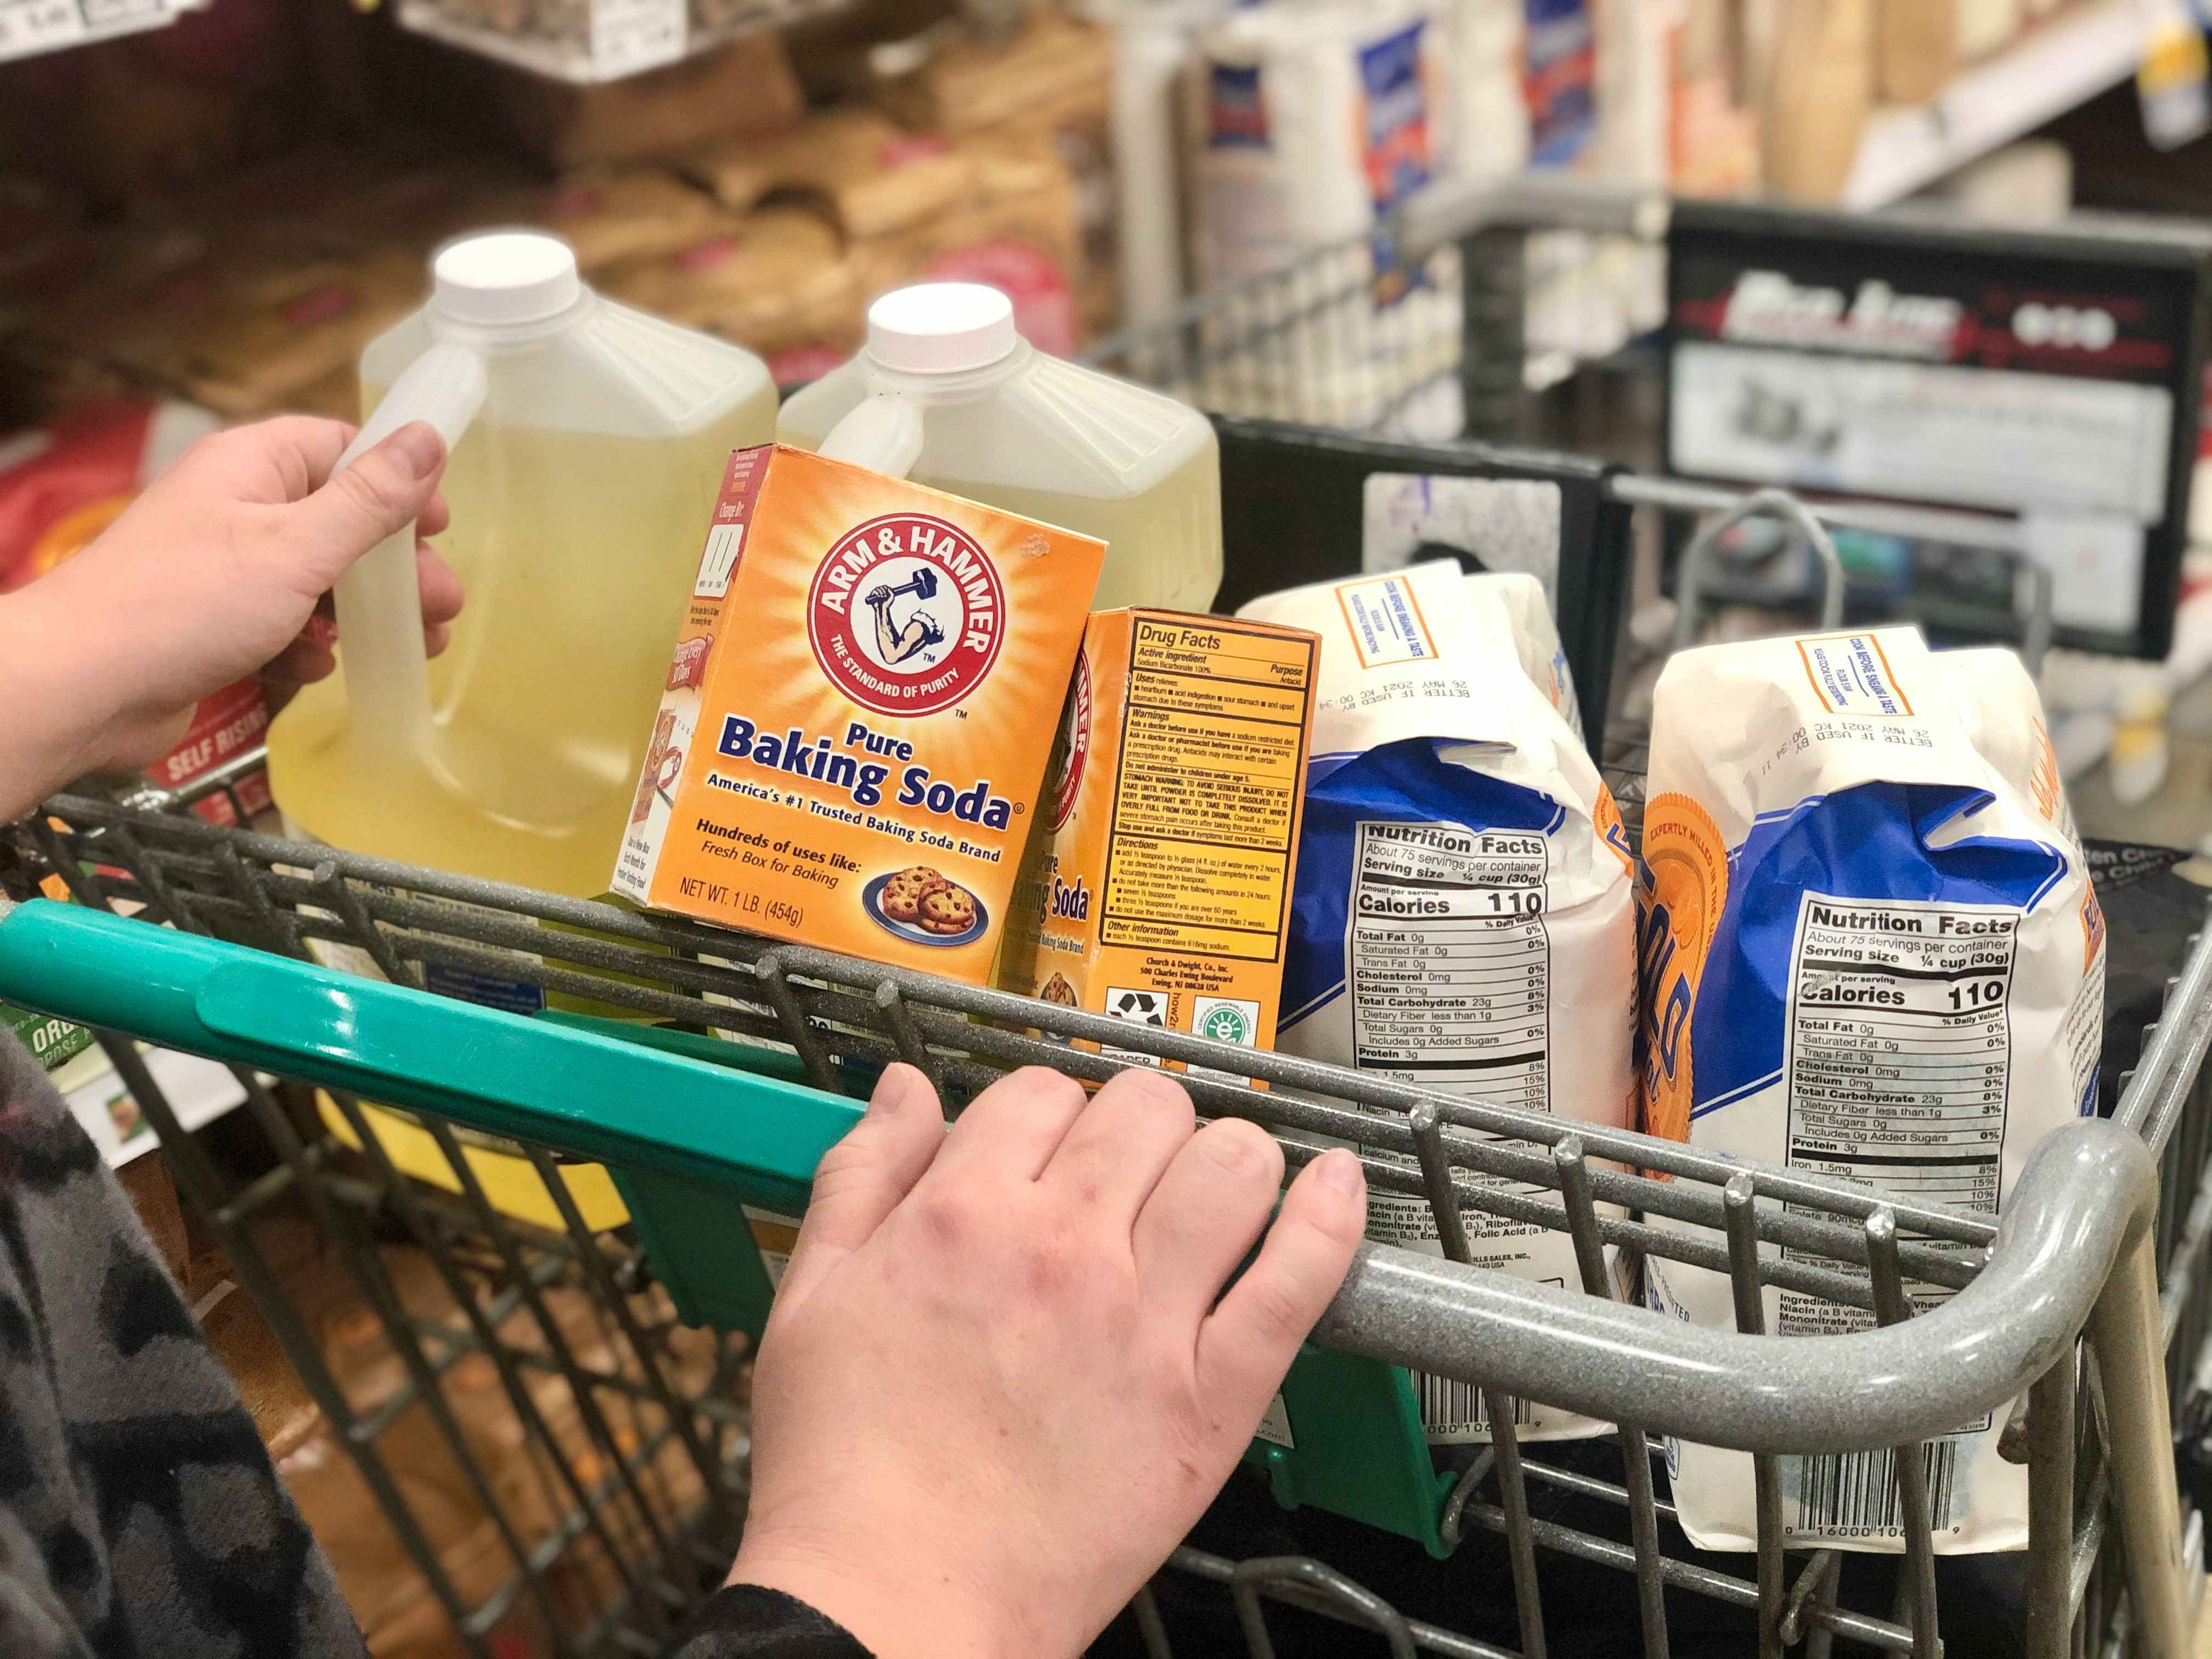 A woman has a cart full of pantry items.